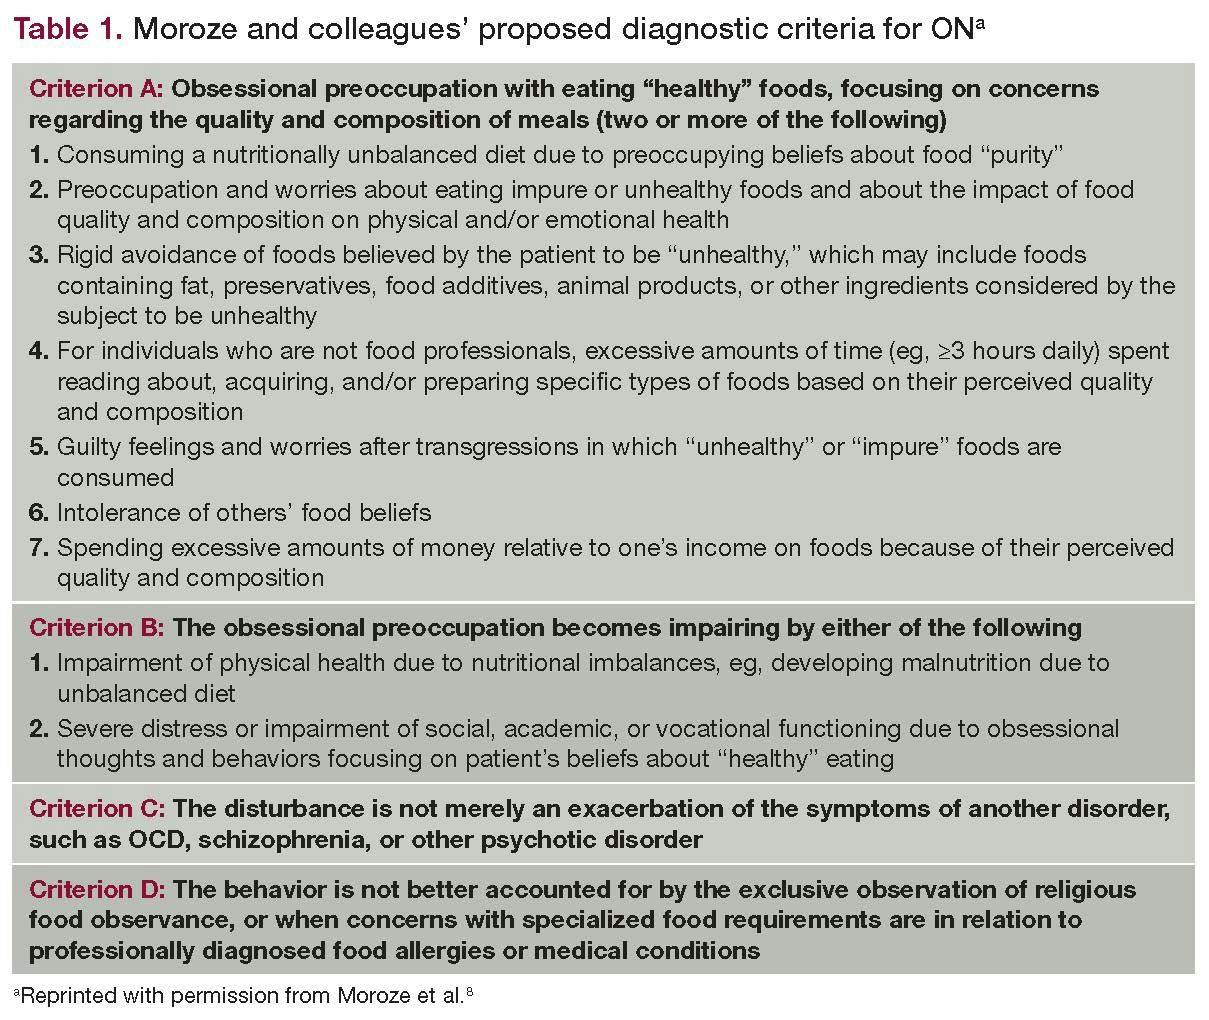 Table 1. Moroze and colleagues’ proposed diagnostic criteria for ON